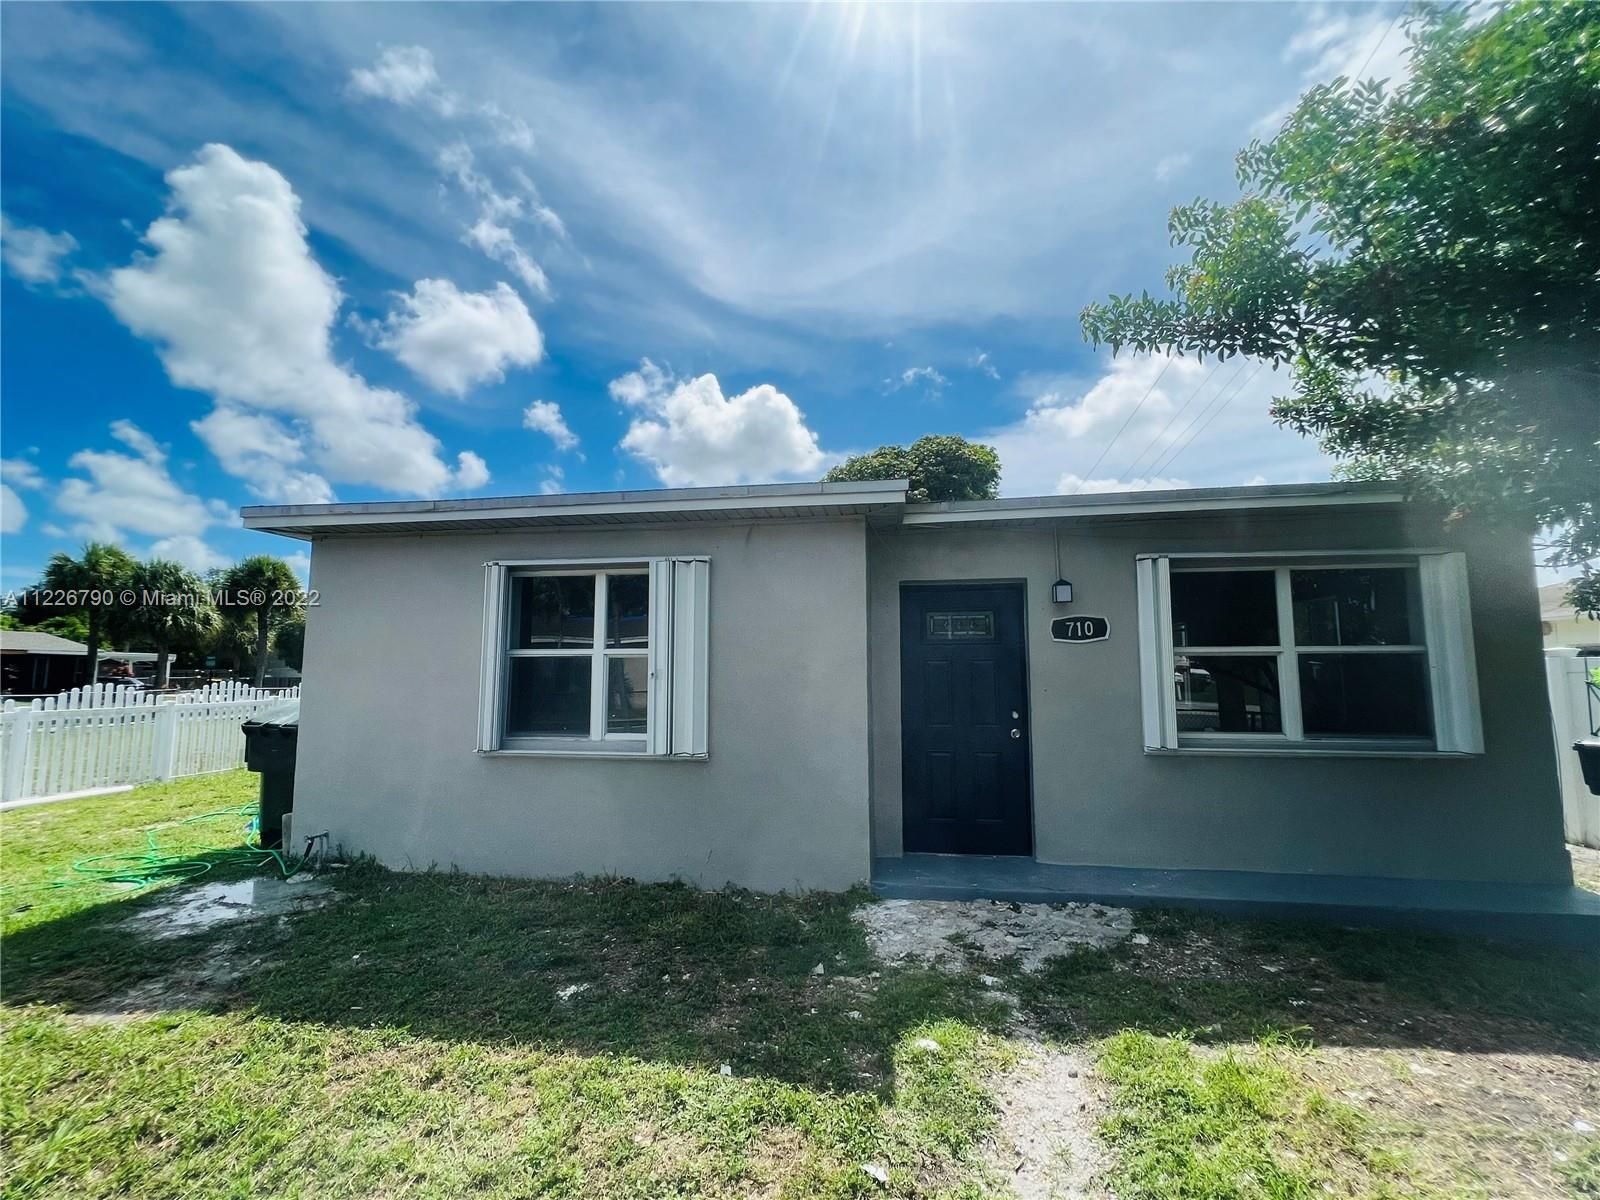 Real estate property located at 710 Phippen Waiters Rd, Broward County, Dania Beach, FL